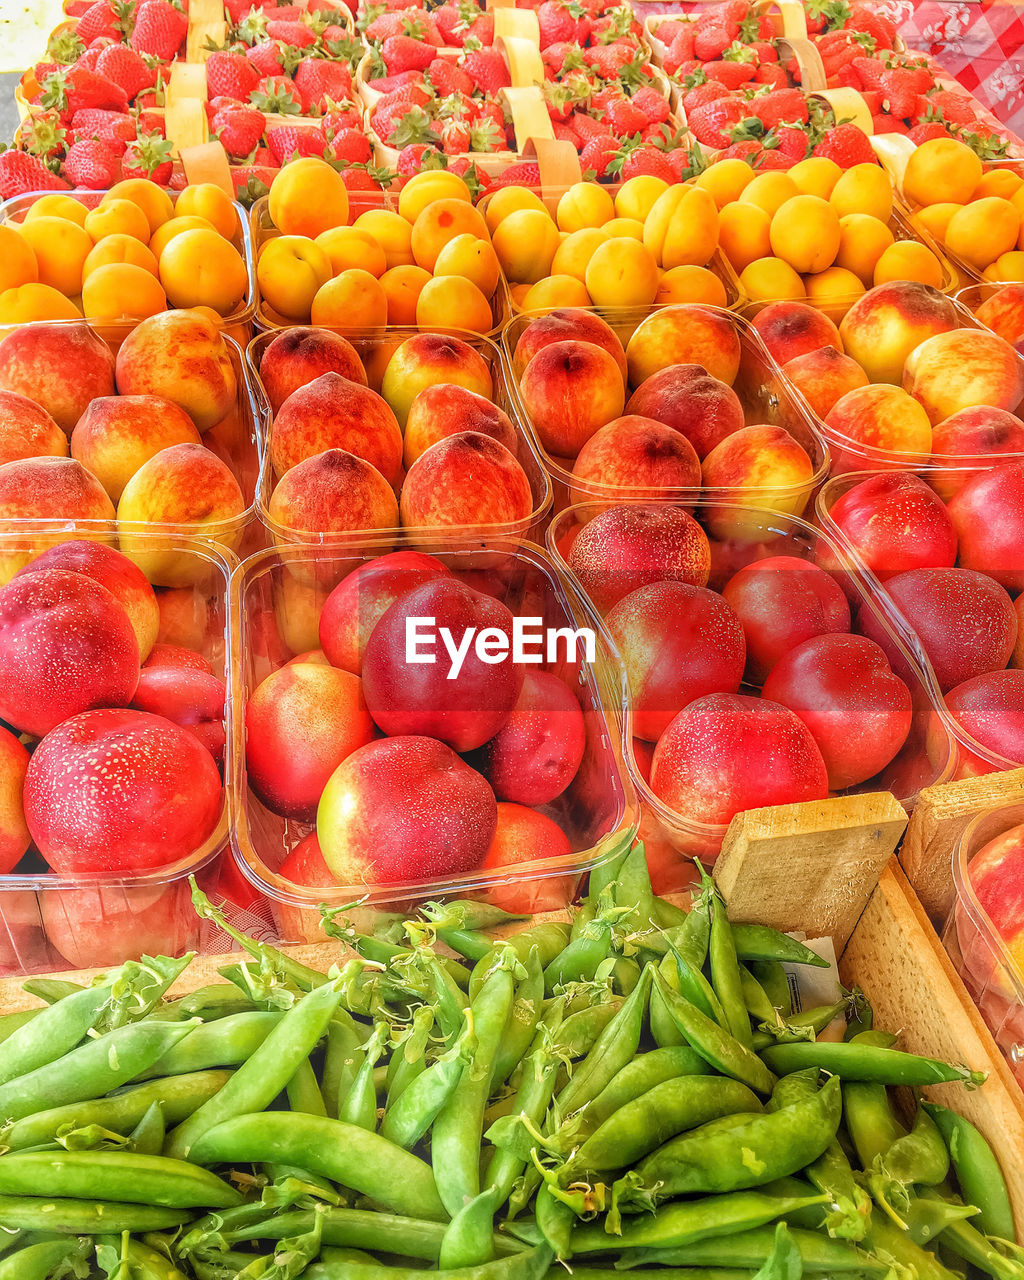 HIGH ANGLE VIEW OF FRUITS FOR SALE AT MARKET STALL